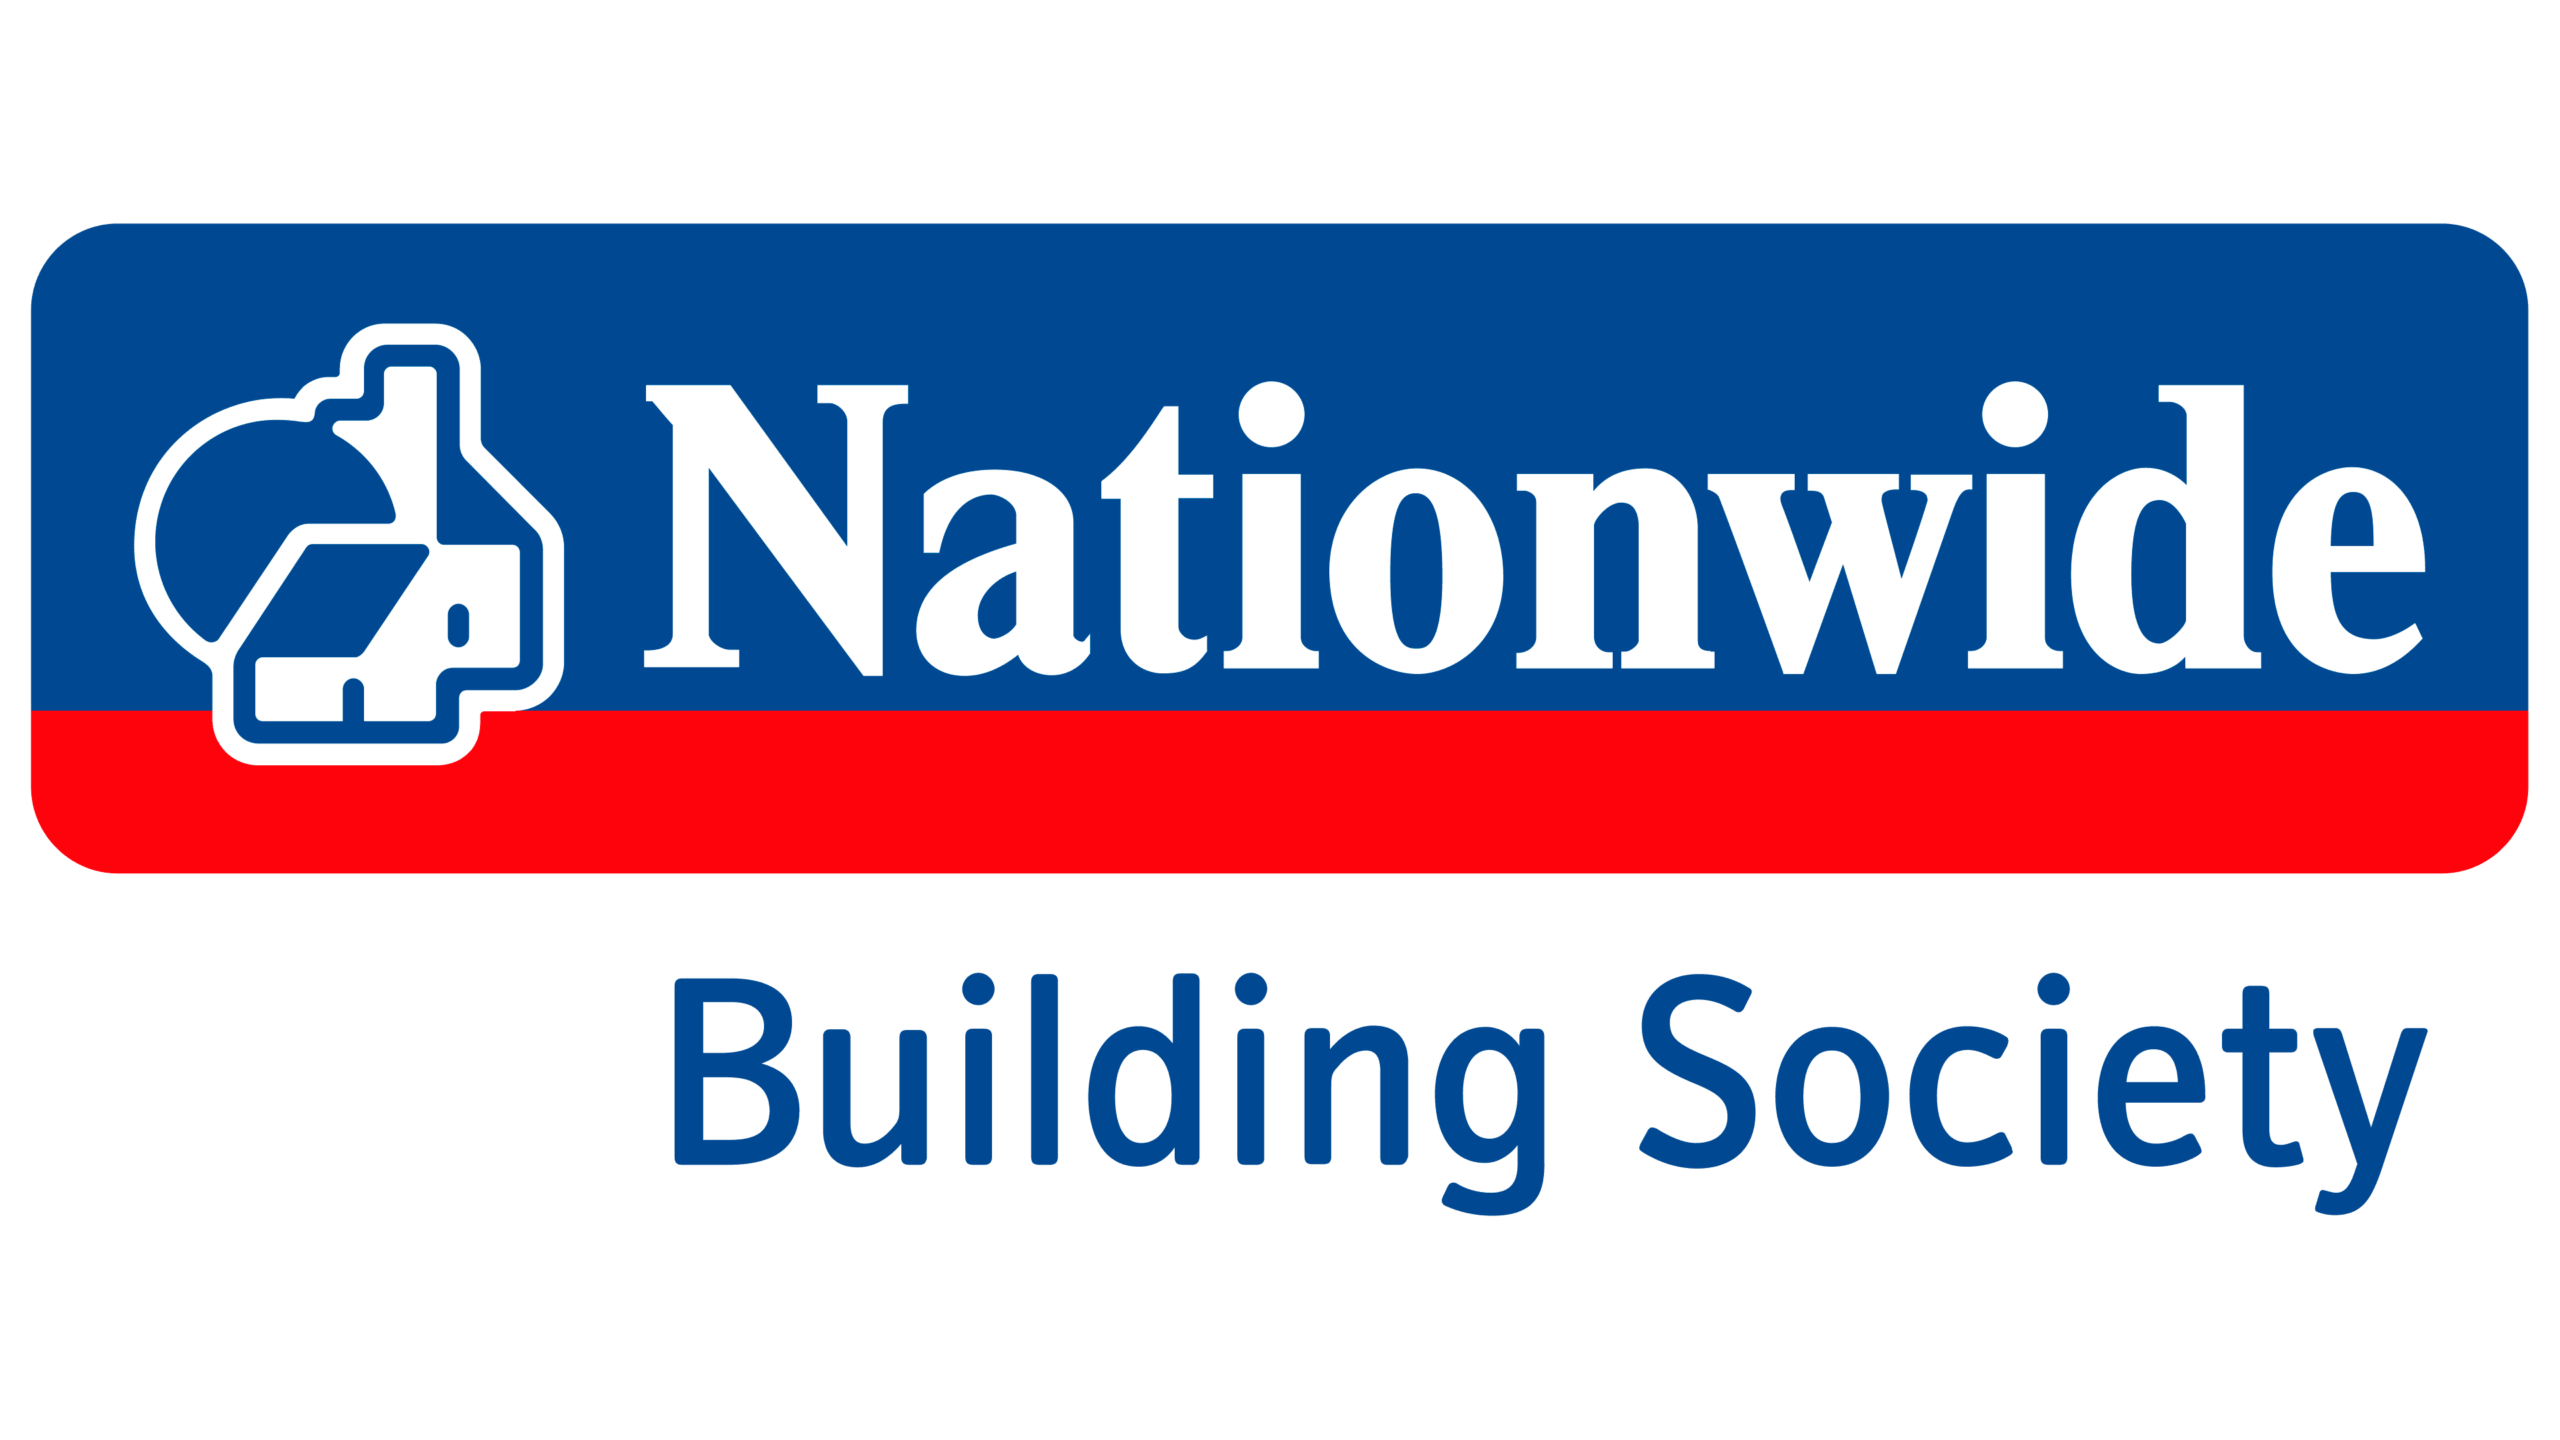 Previous Nationwide Logo | Nationwide Building Society Rebrand | What Is Rebranding